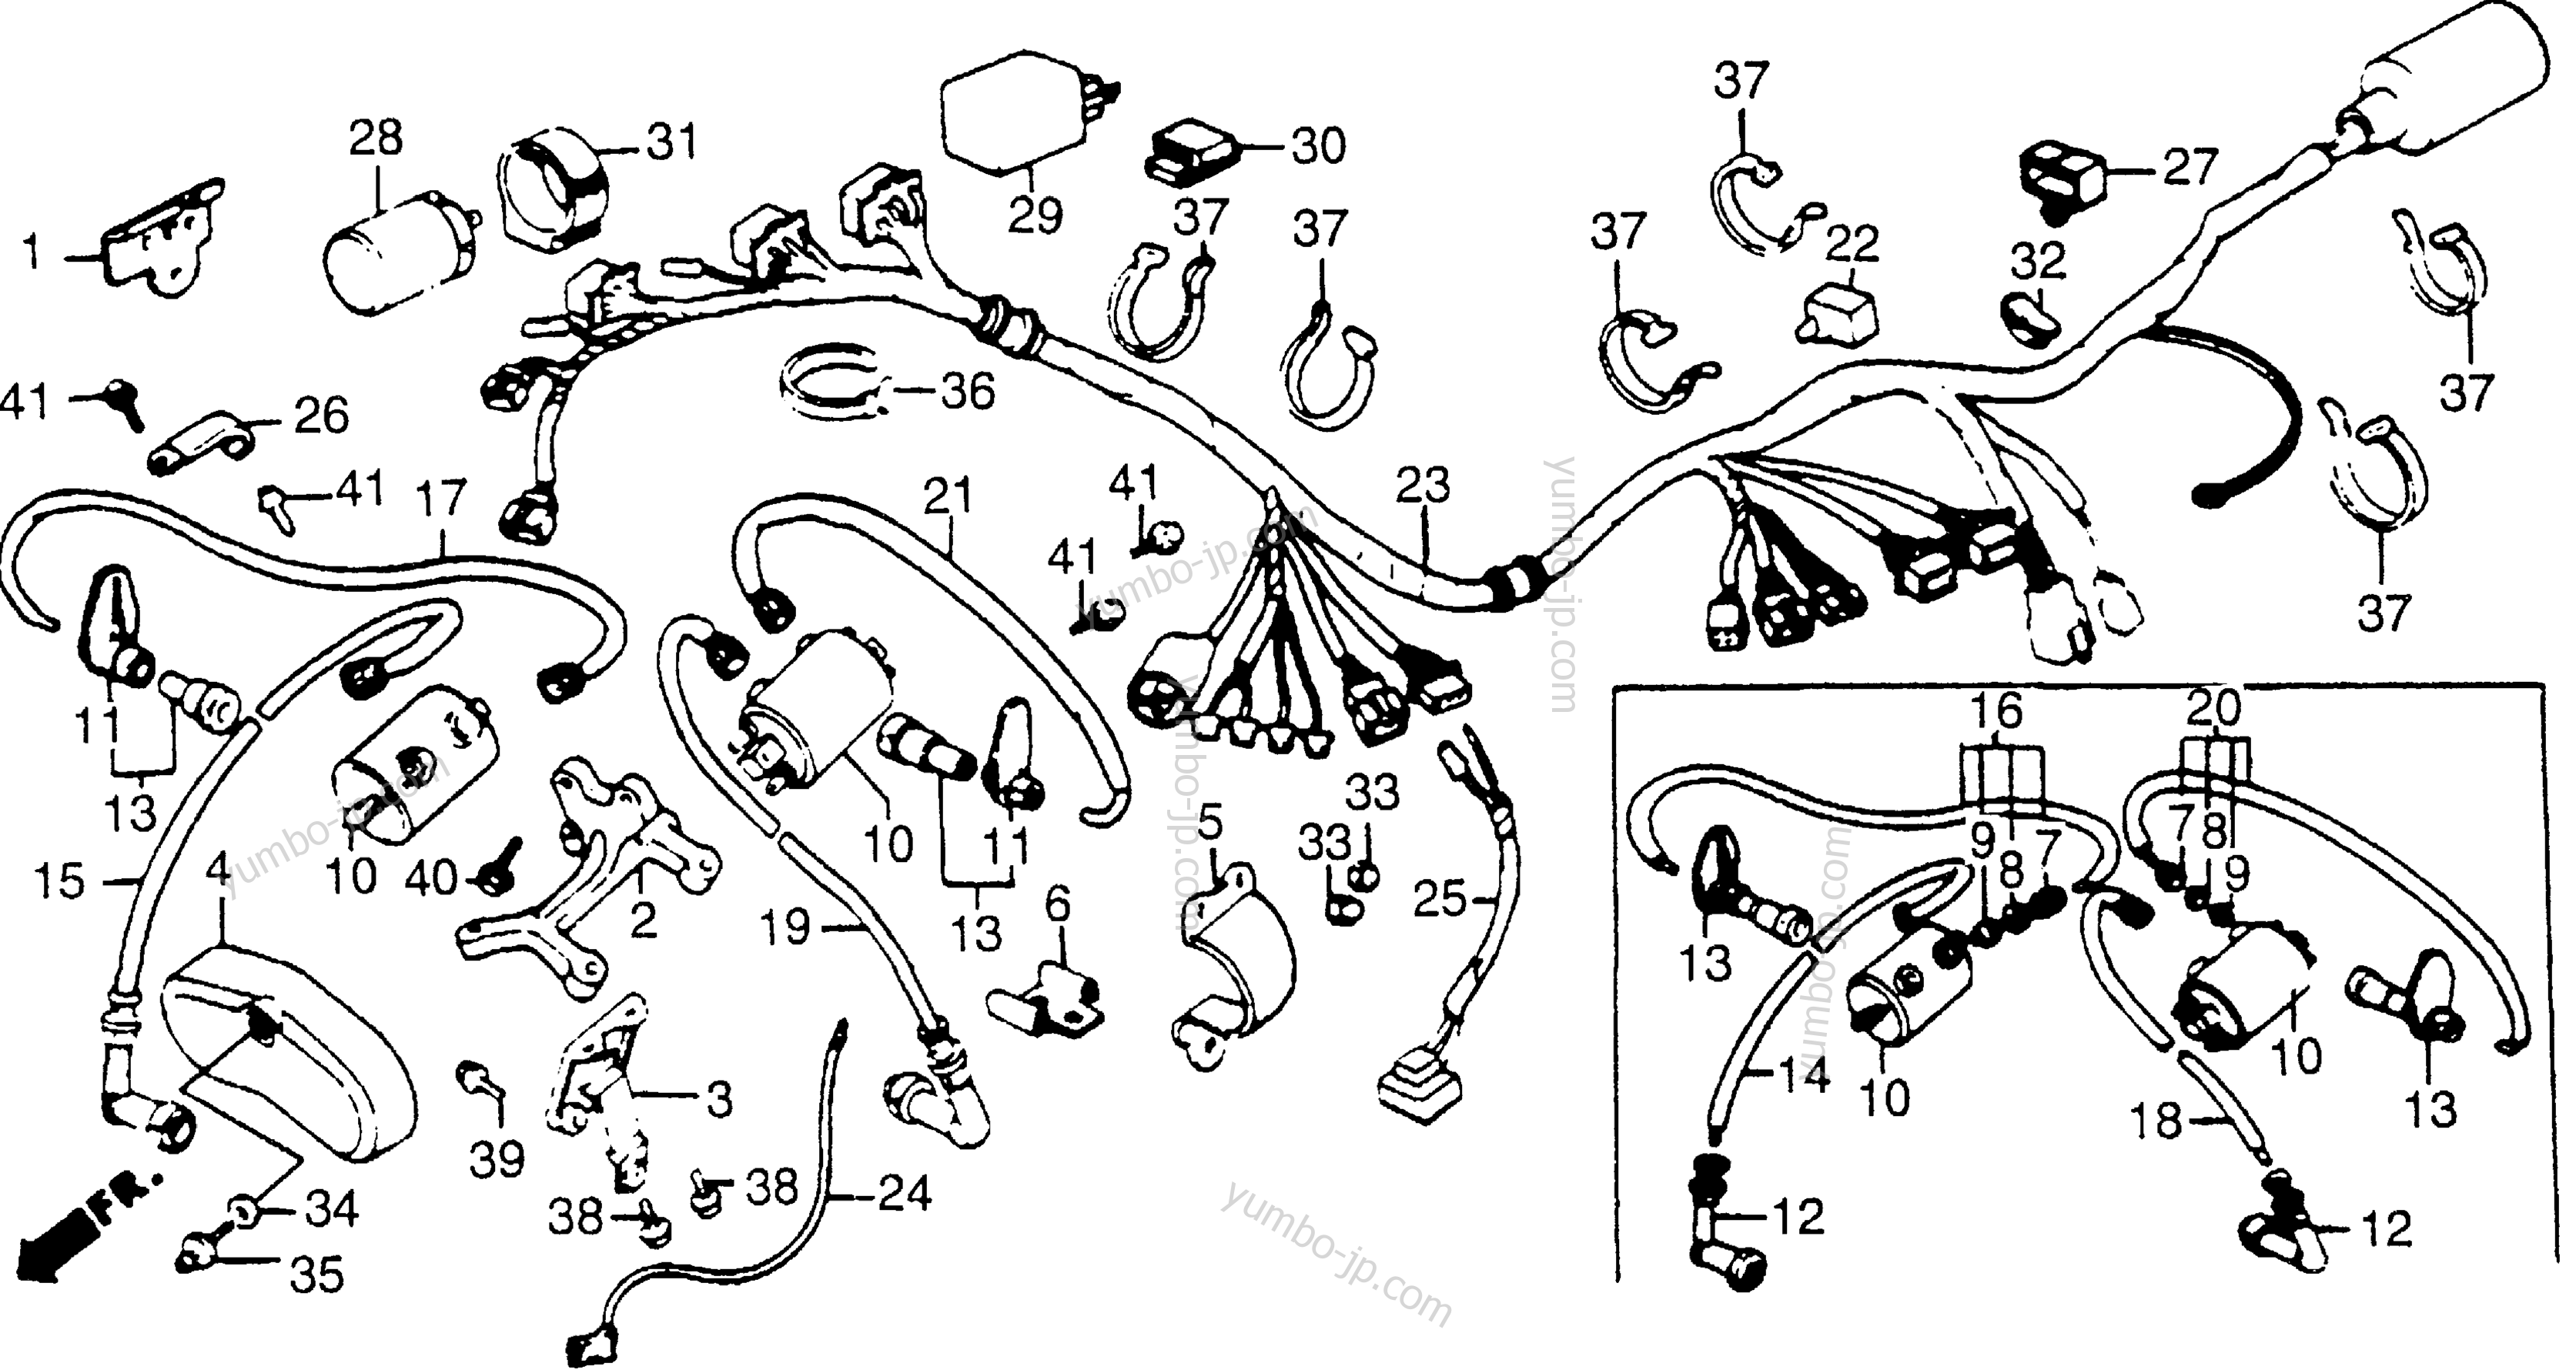 WIRE HARNESS for motorcycles HONDA VT500C AC 1986 year